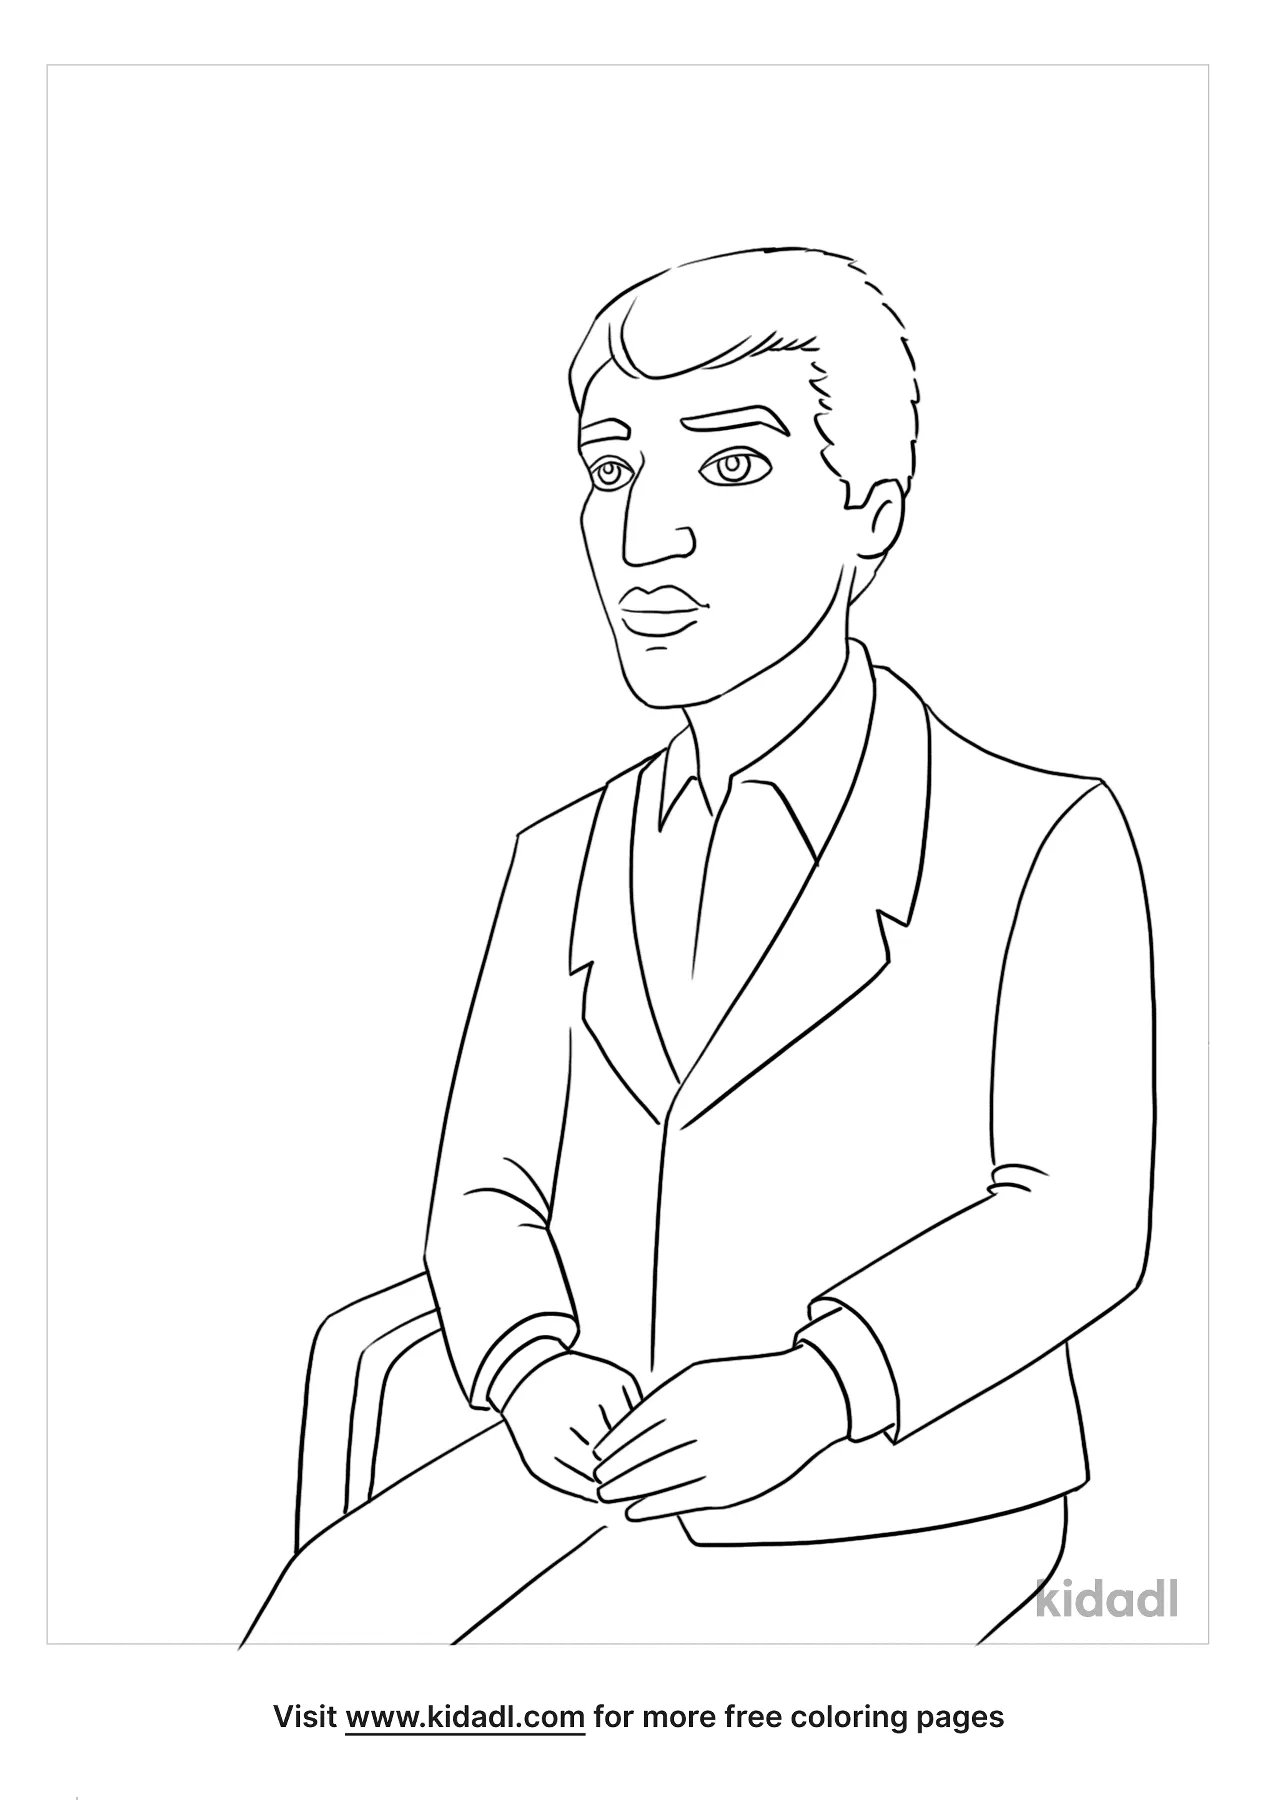 Free Andrew Jackson Coloring Page | Coloring Page Printables | Kidadl